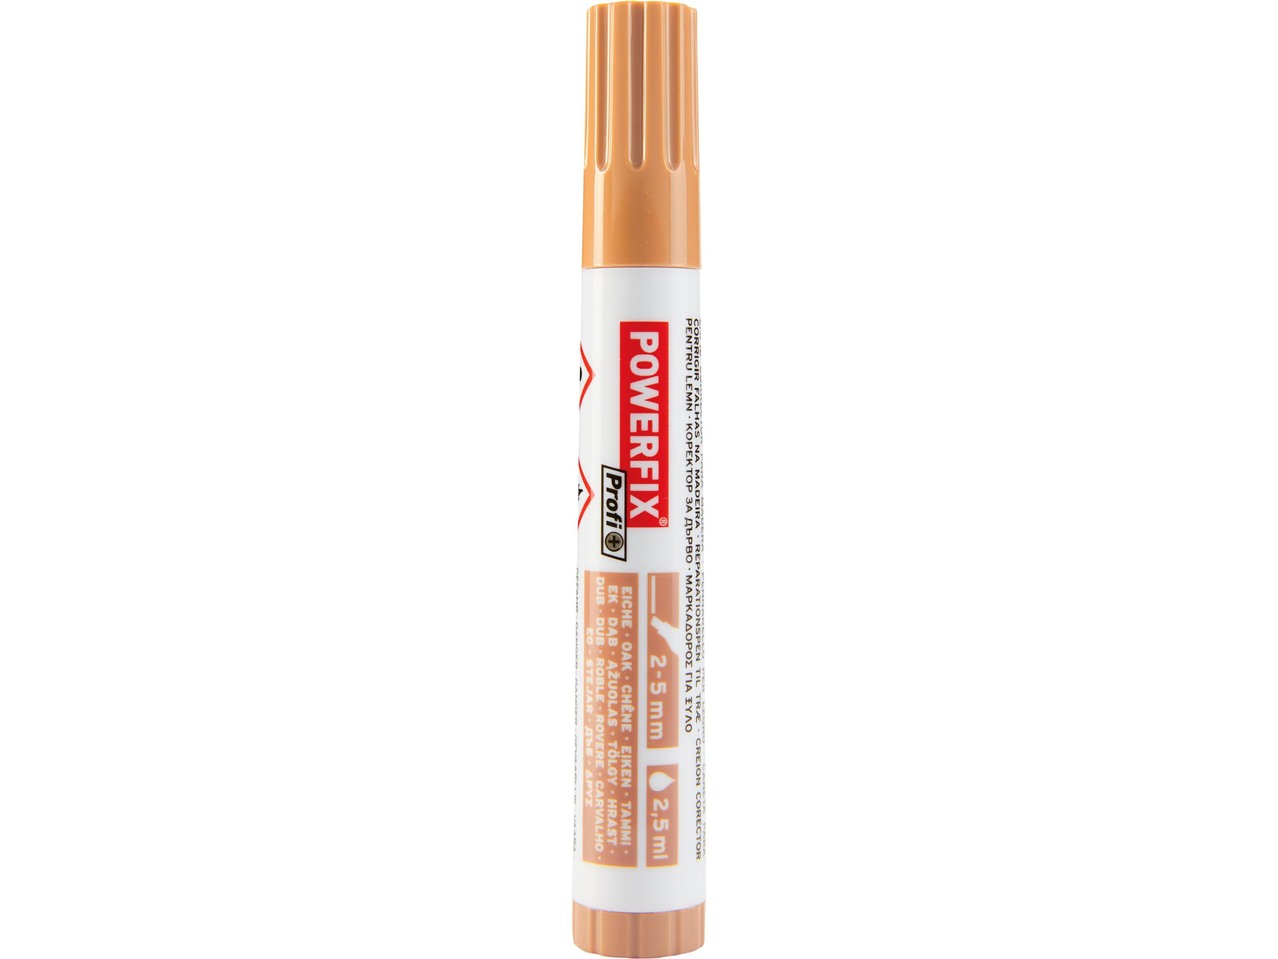 Grout or Wood Touch-Up Pen